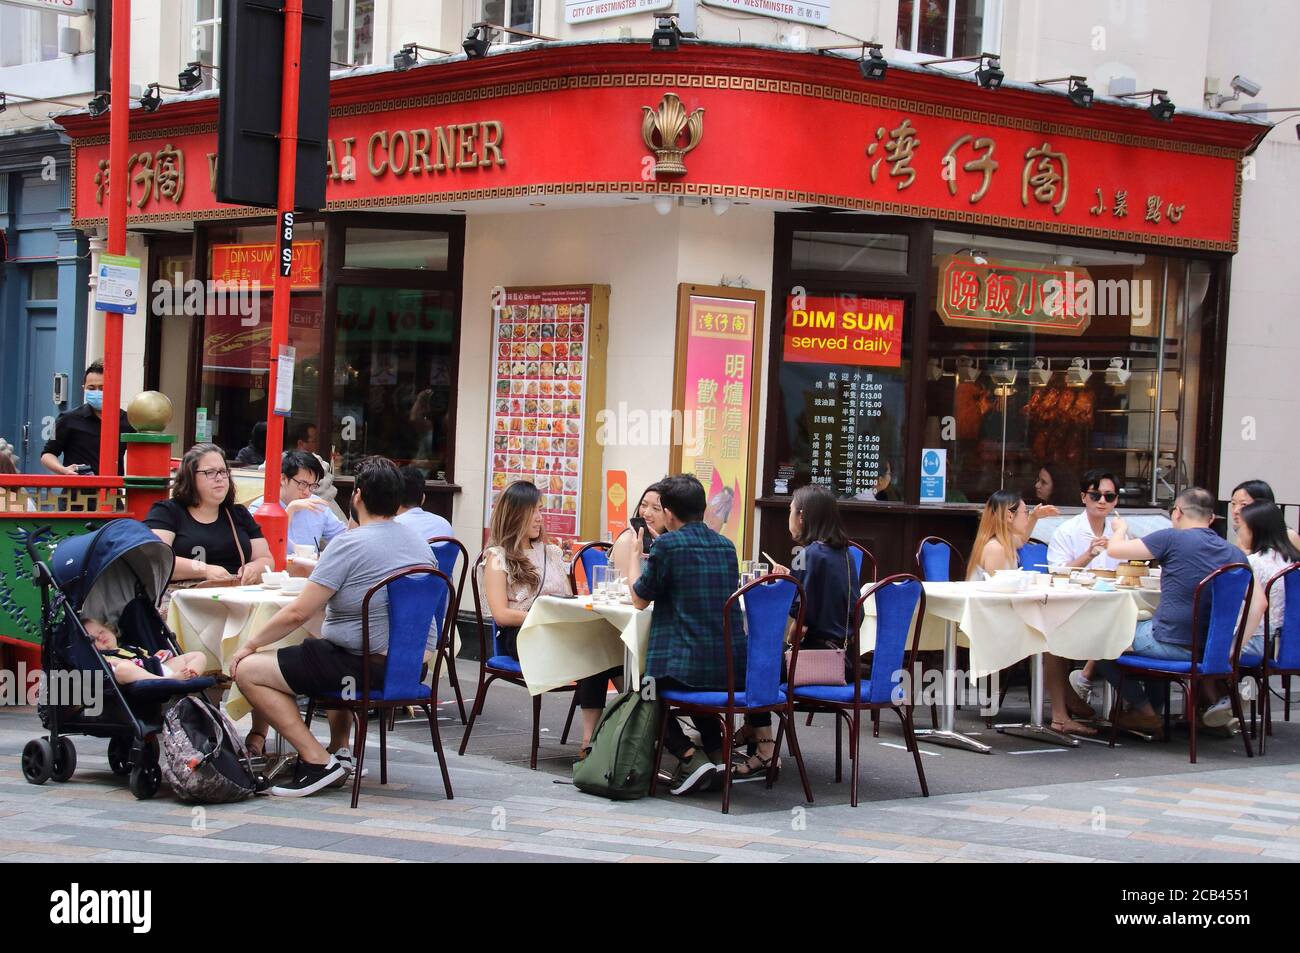 London. UK. A far cry from the empty, desolate streets of lockdown days due to the Cornavirus pandemic, London's Chinatown has embraced the new outdoor dining culture and the streets are busier and restaurants doing good business again in Gerrard Street, London. 1st August 2020. Ref:LMK73-S3075-020820 Keith Mayhew/Landmark Media  WWW.LMKMEDIA.COM. Stock Photo